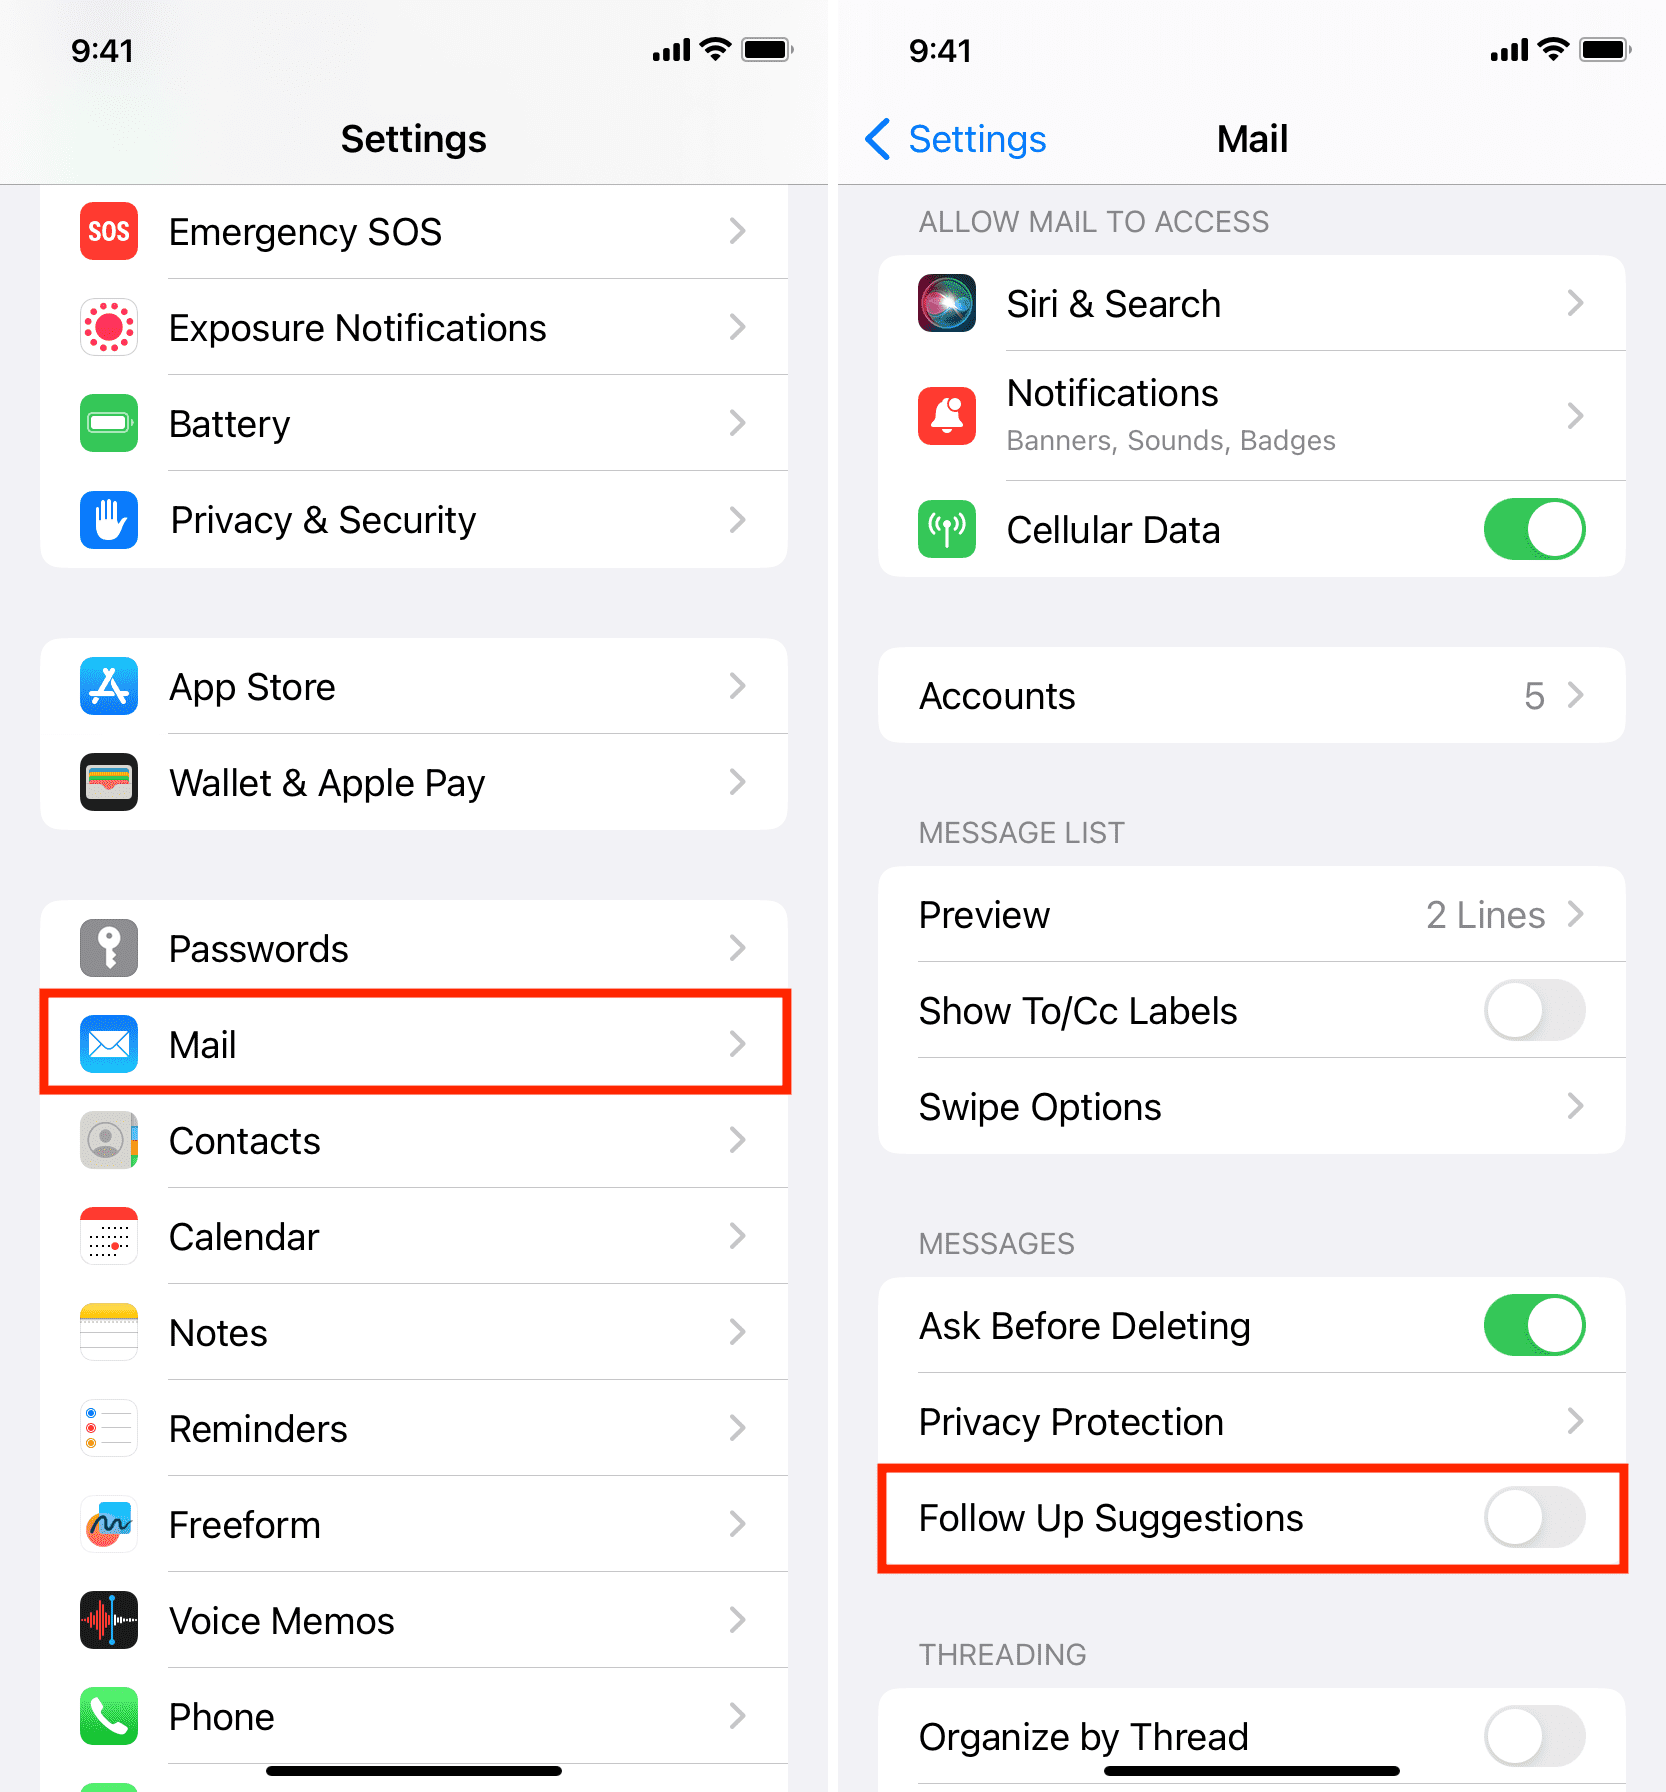 Disable Follow Up Suggestions in Mail app Settings on iPhone